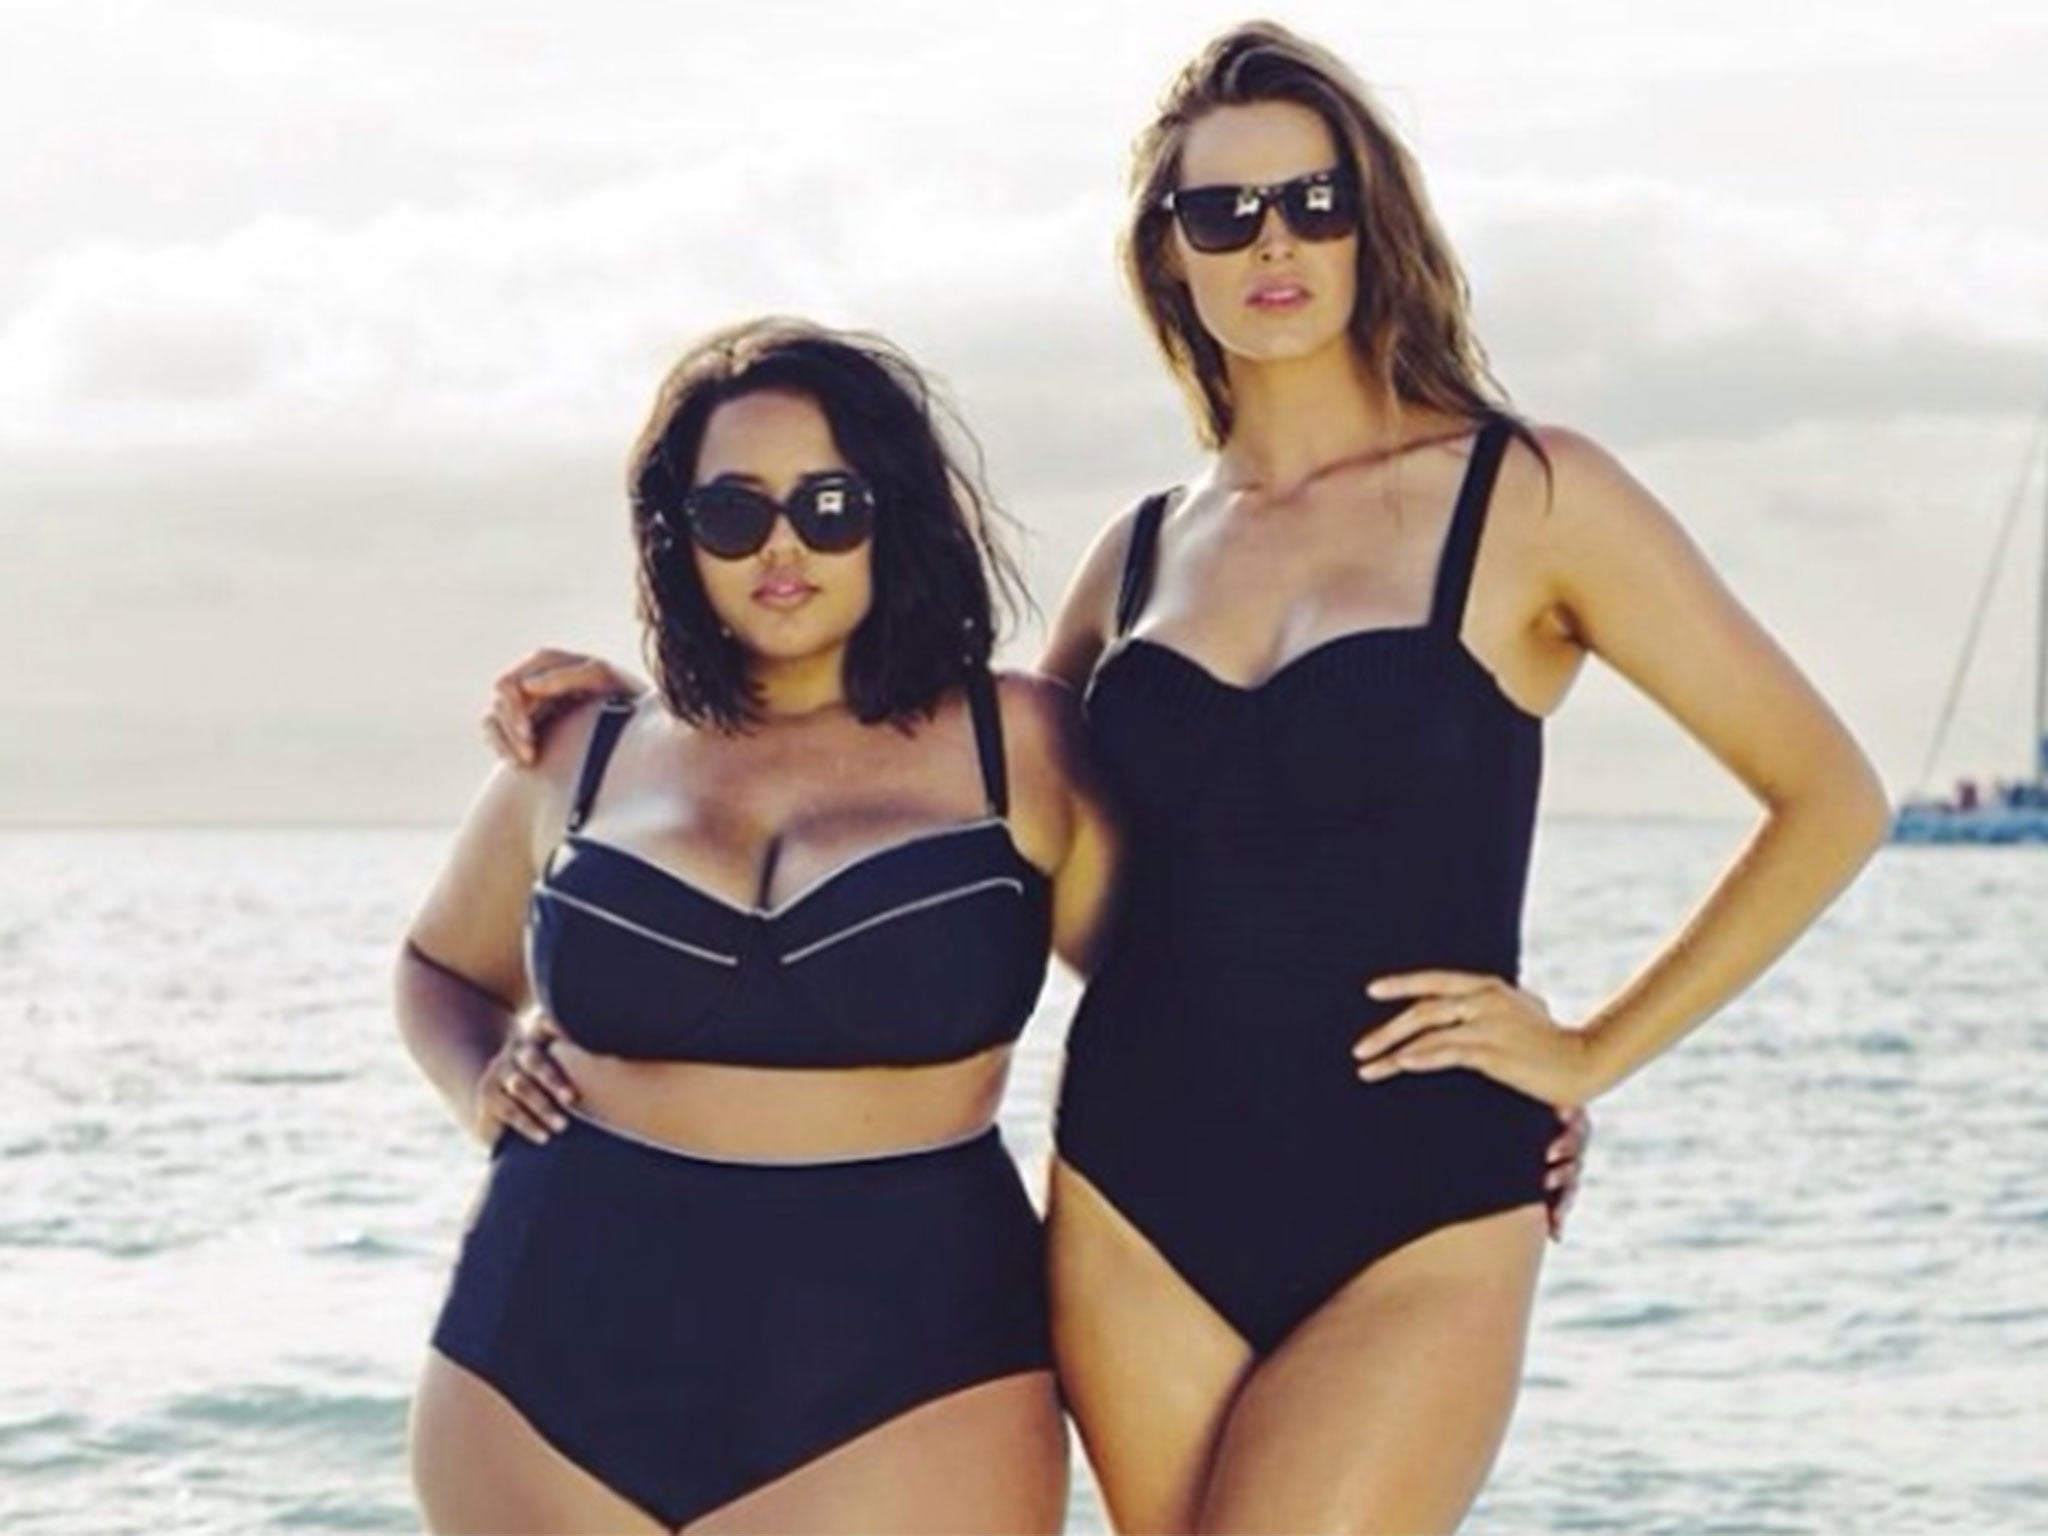 Blogger Gabi Fresh (left) encourages plus-size women to feel comfortable with their figure at the beach with#Fatkini